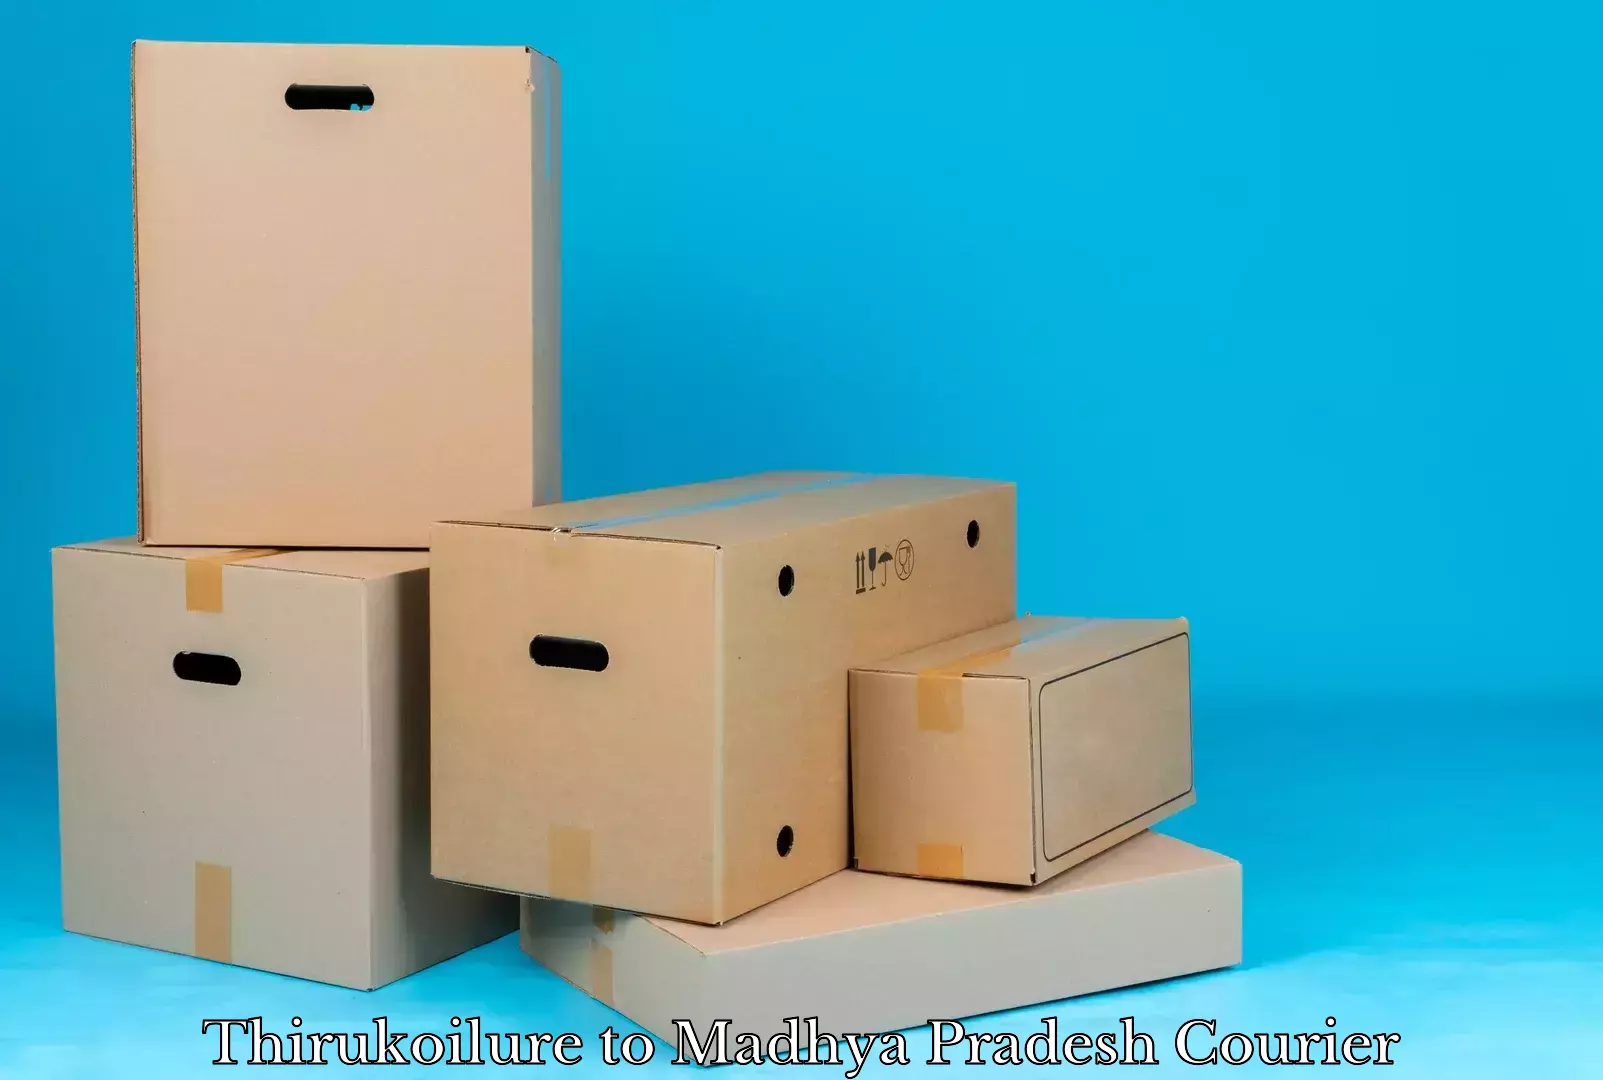 Furniture moving experts Thirukoilure to Gwalior